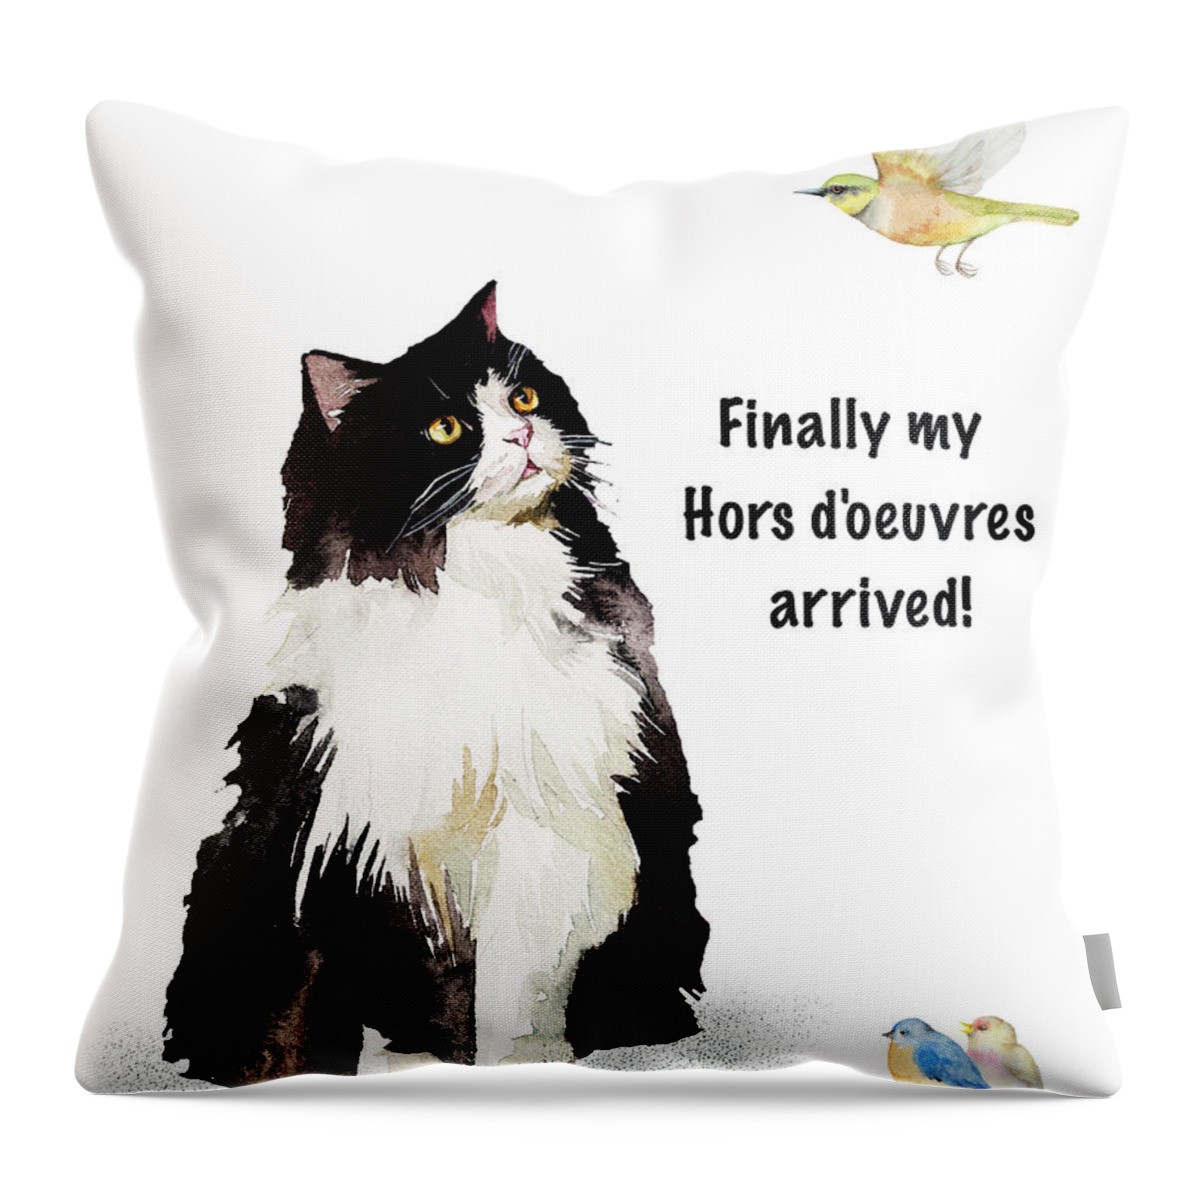 Cats Throw Pillow featuring the painting The Cat's Hors d'oeuvres by Colleen Taylor